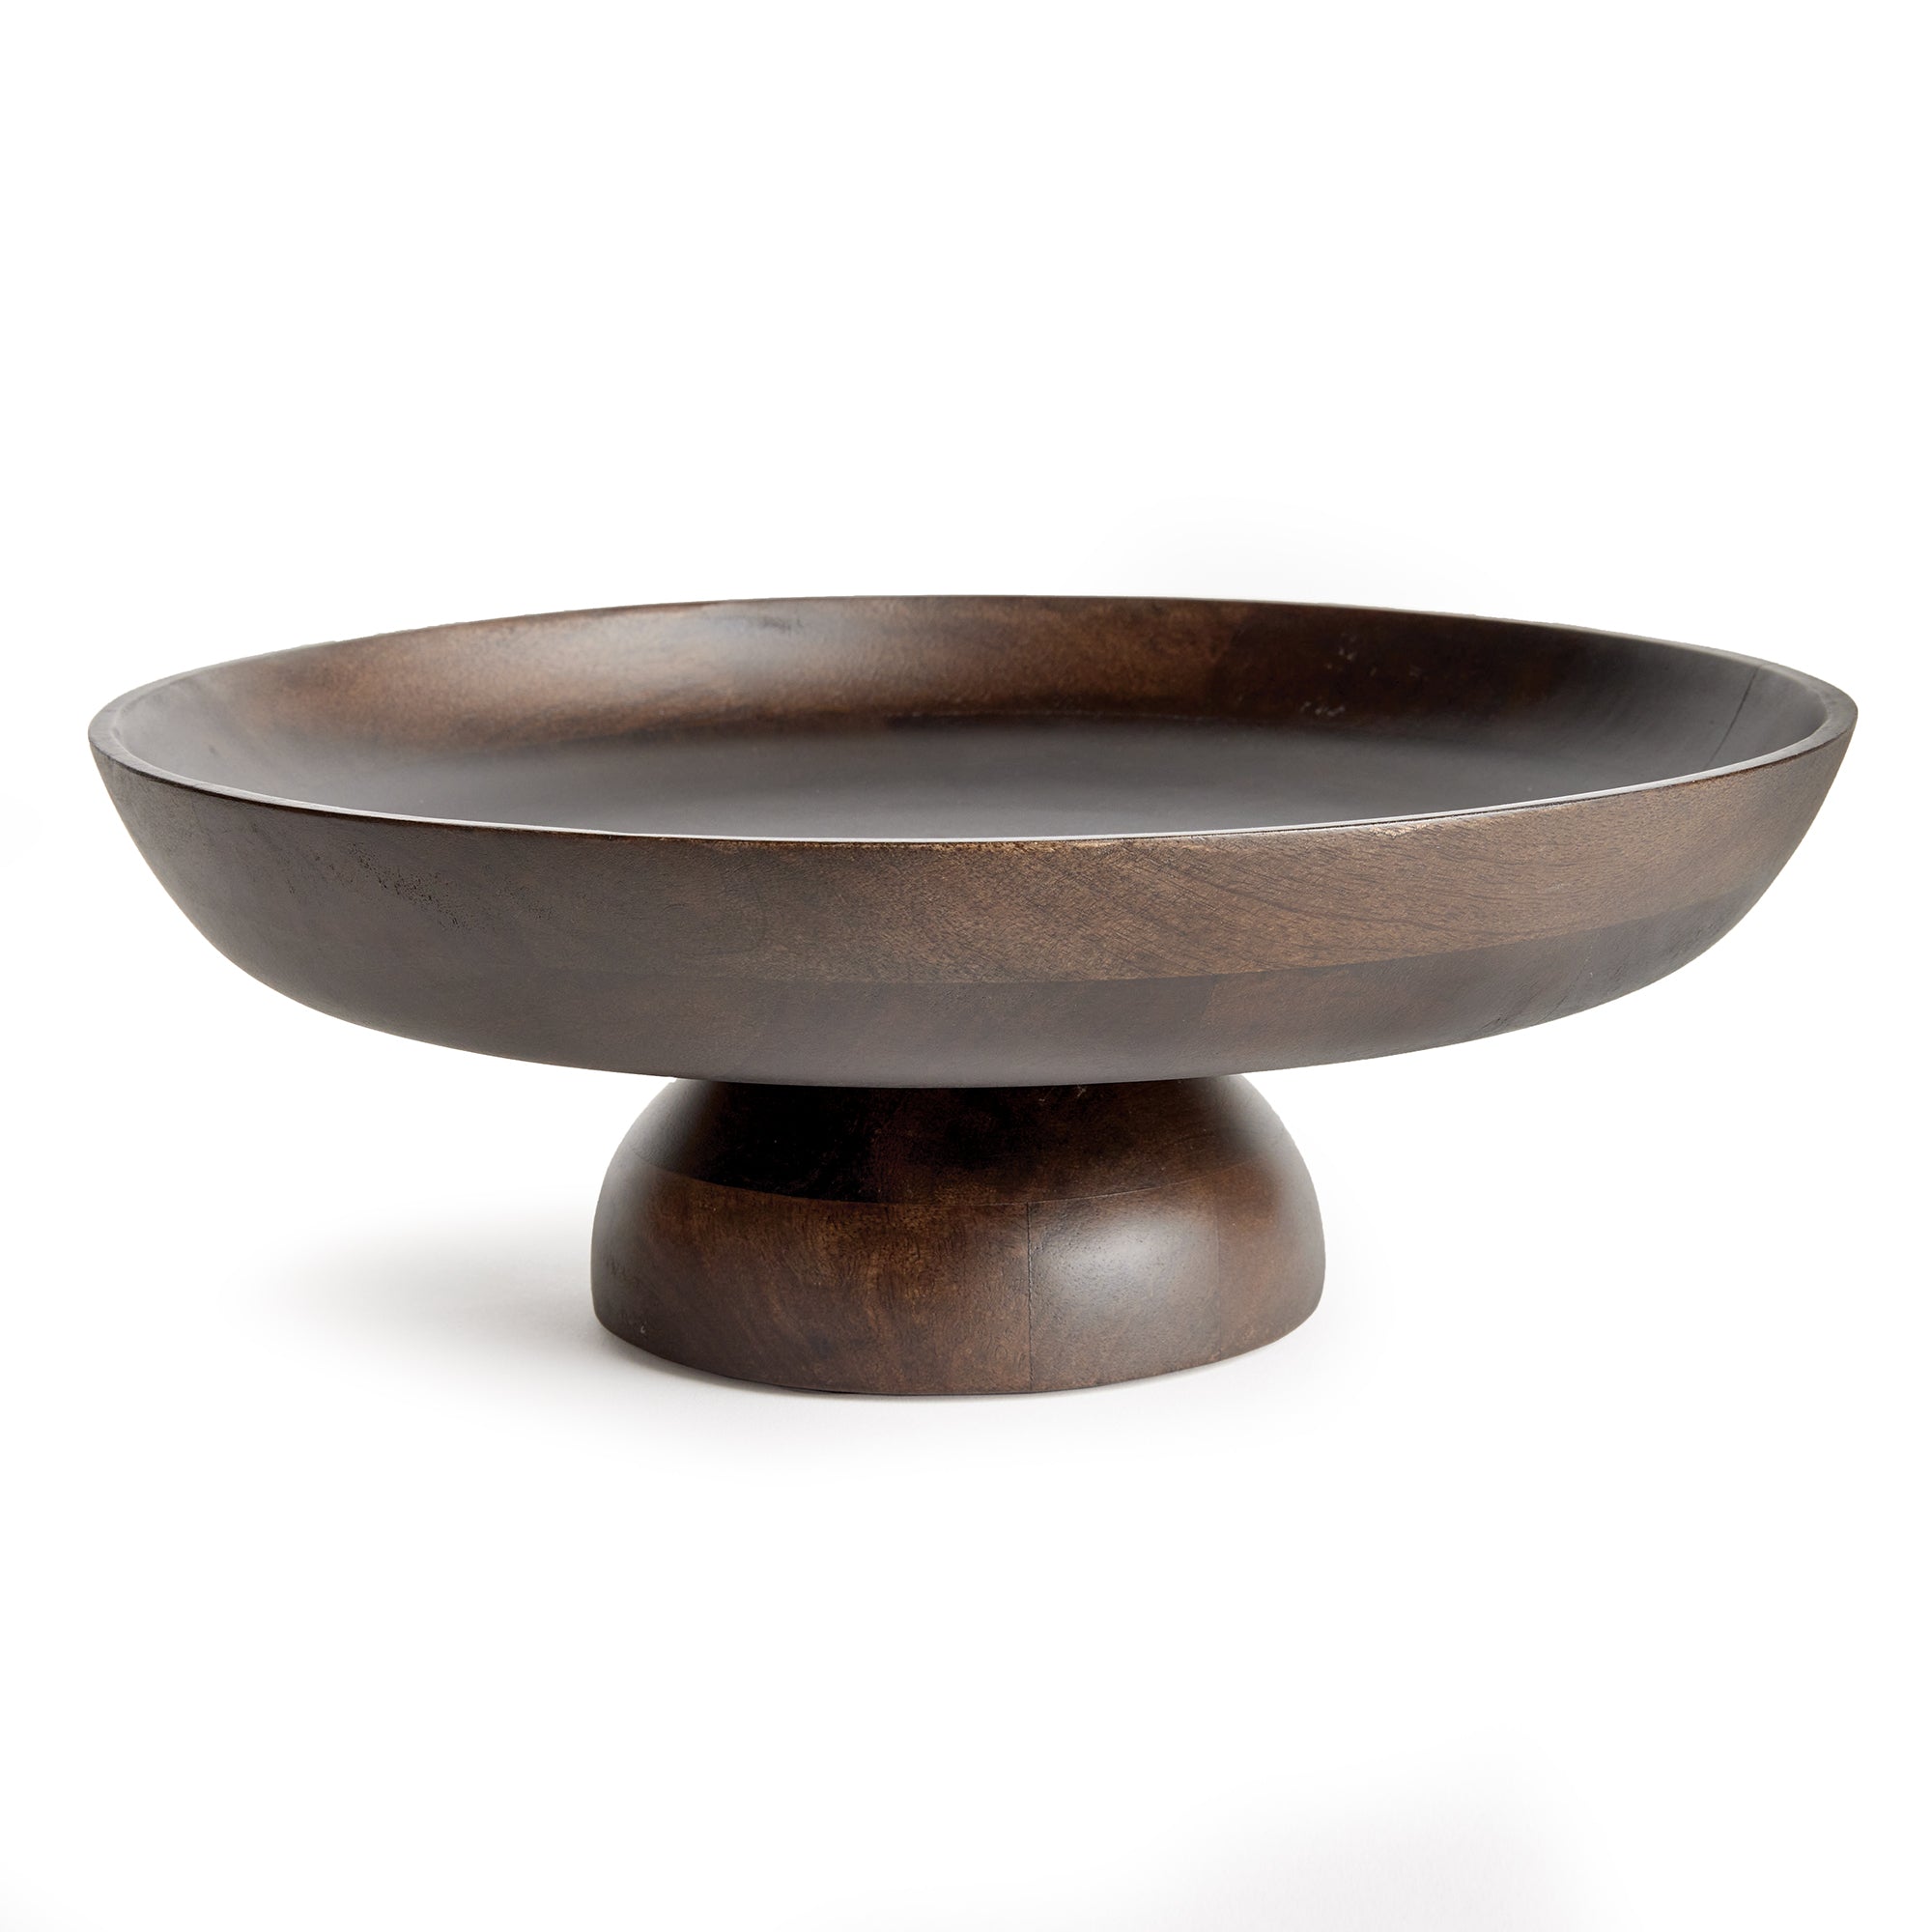 Contemporary and uniquely designed, this footed bowl is made of mango wood. Makes a beautiful serving bowl for dry foods, as well as a gorgeous centerpiece all on its own. Amethyst Home provides interior design, new construction, custom furniture, and area rugs in the San Diego metro area.